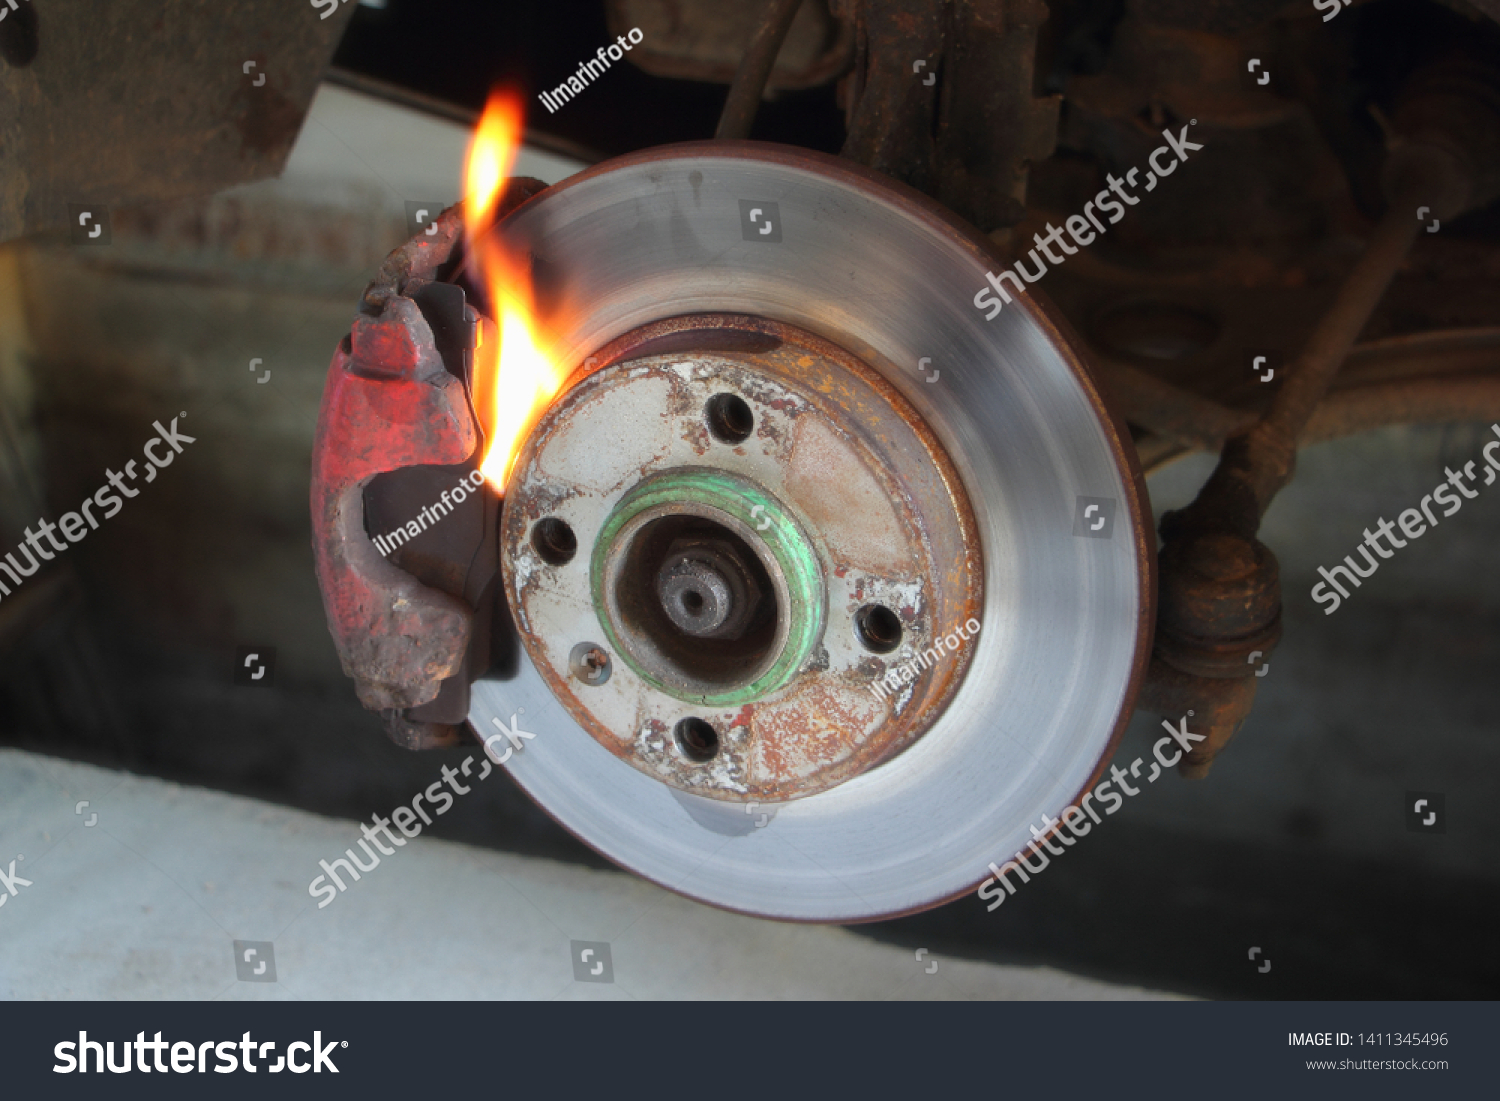 Unvented car brakes on fire, danger of overheat brake system #1411345496